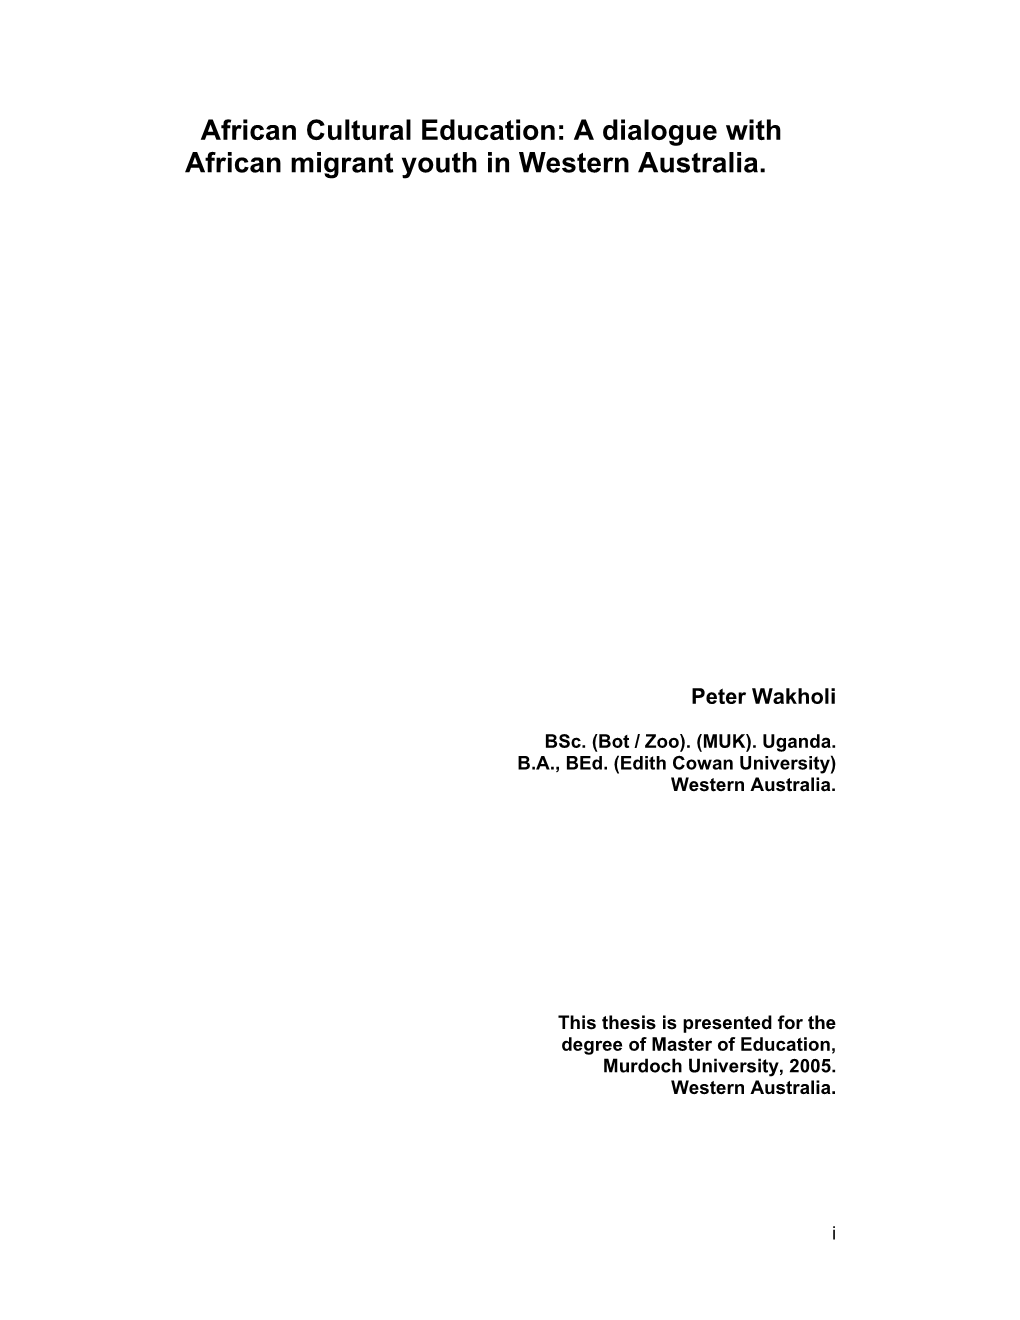 African Cultural Education: a Dialogue with African Migrant Youth in Western Australia